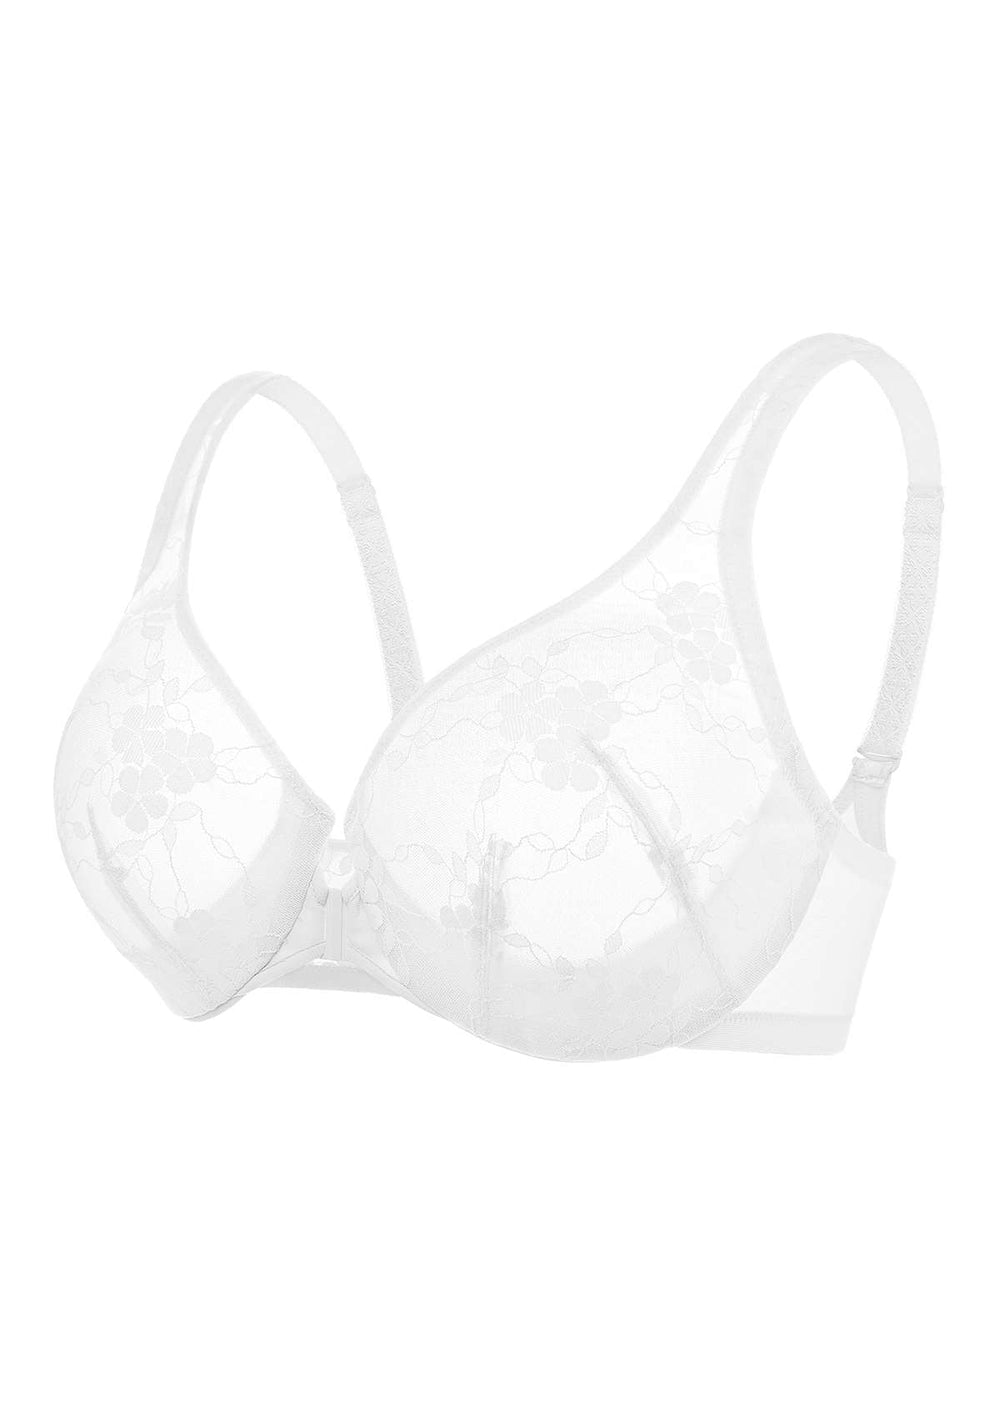 HSIA Spring Romance Front-Close Floral Lace Unlined Bra Set